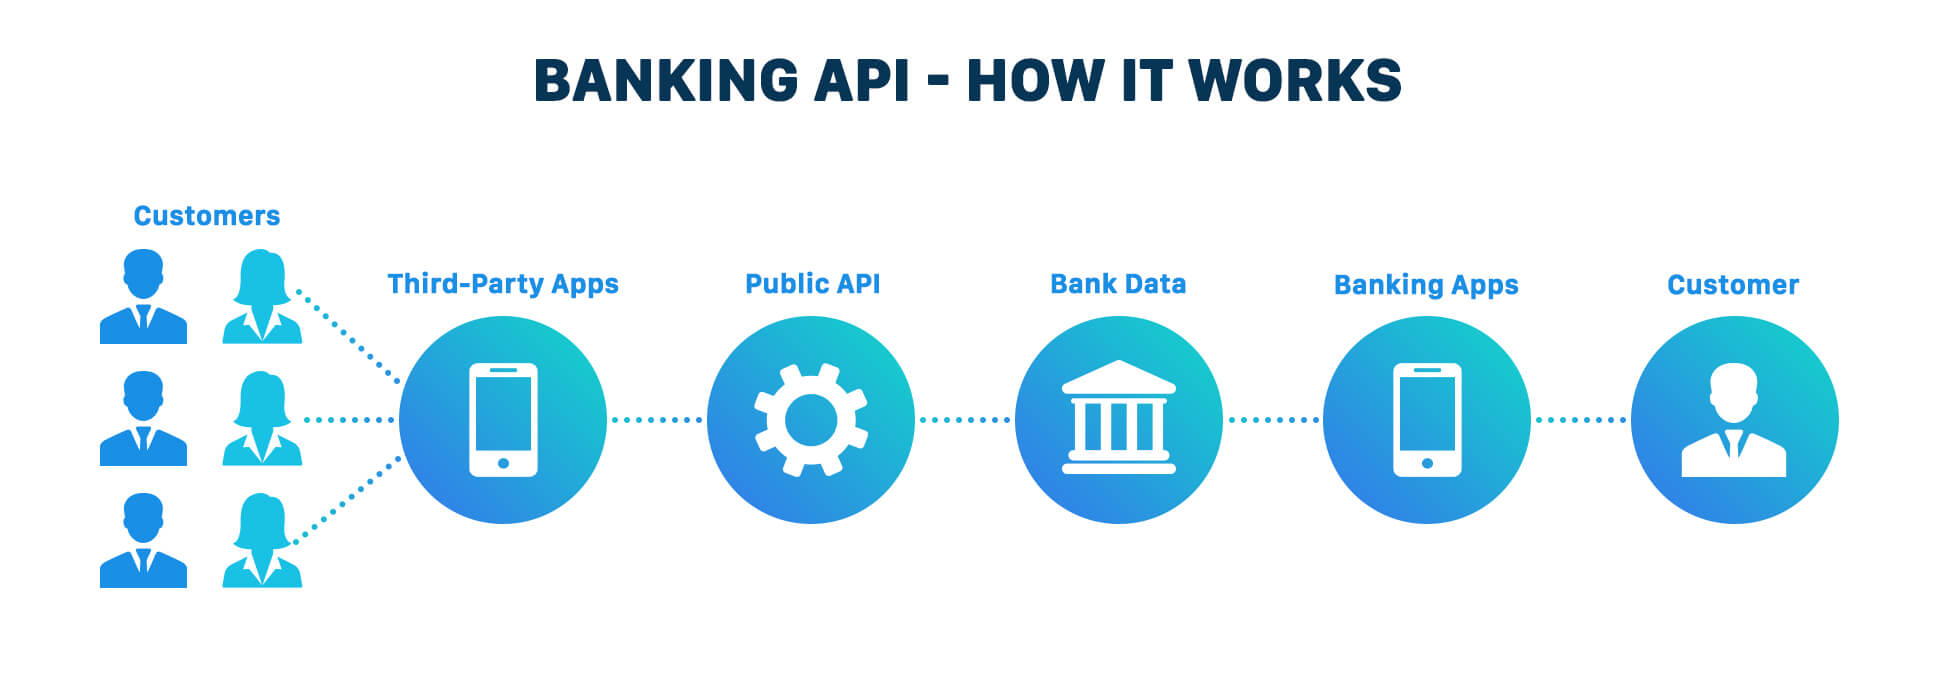 Power of API In Banking: Definitions, Types, and Benefits